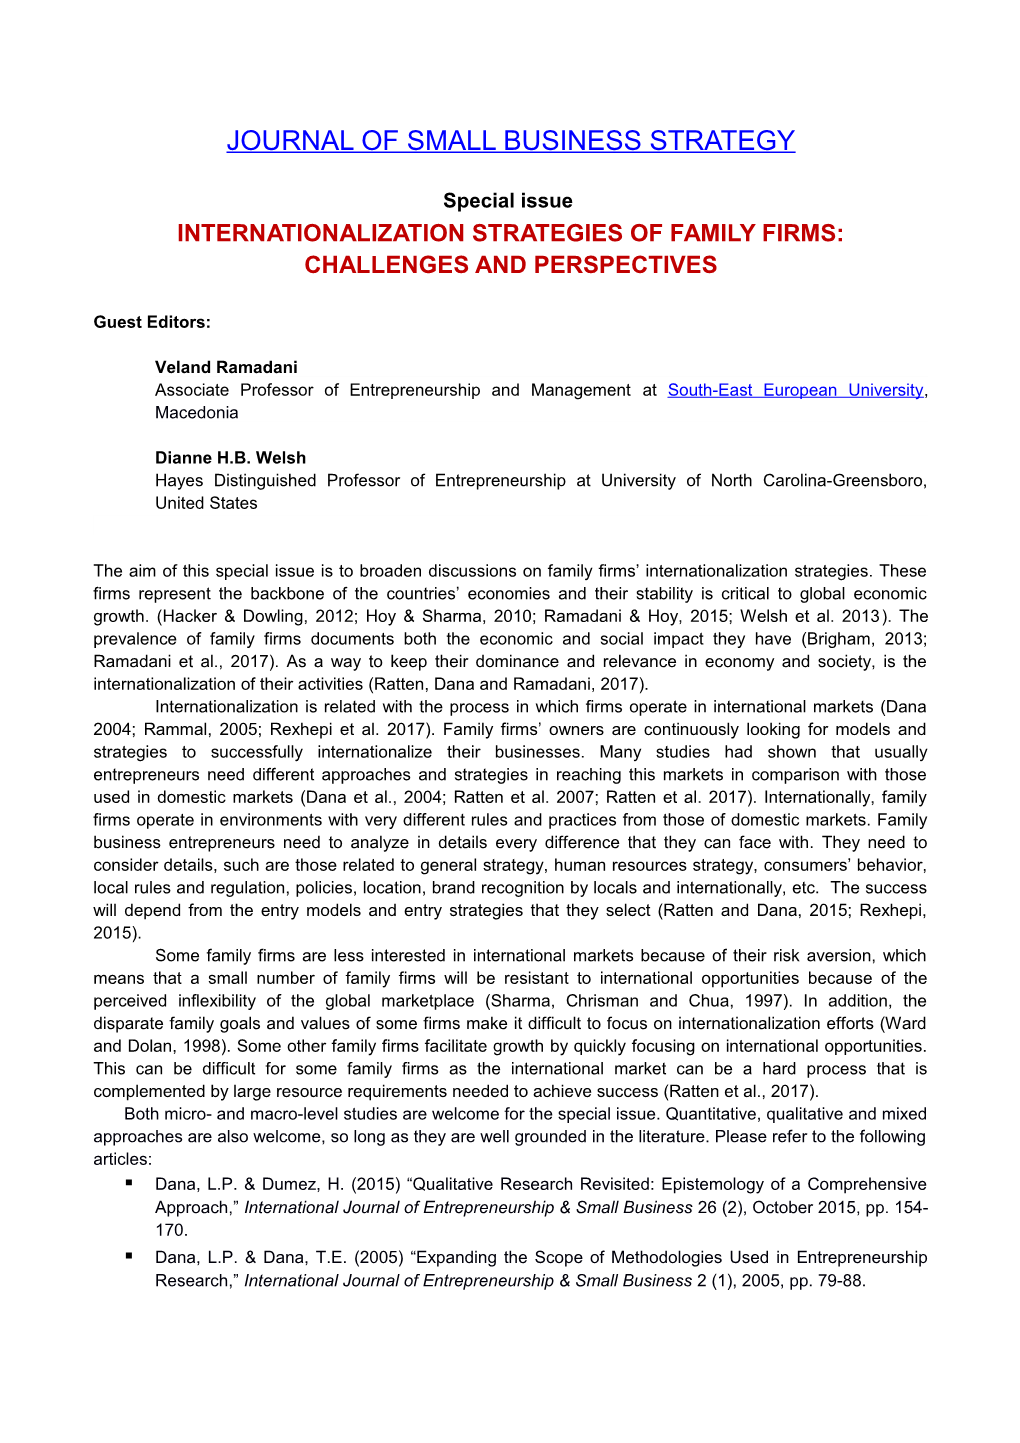 Internationalization Strategies of Family Firms: Challenges and Perspectives